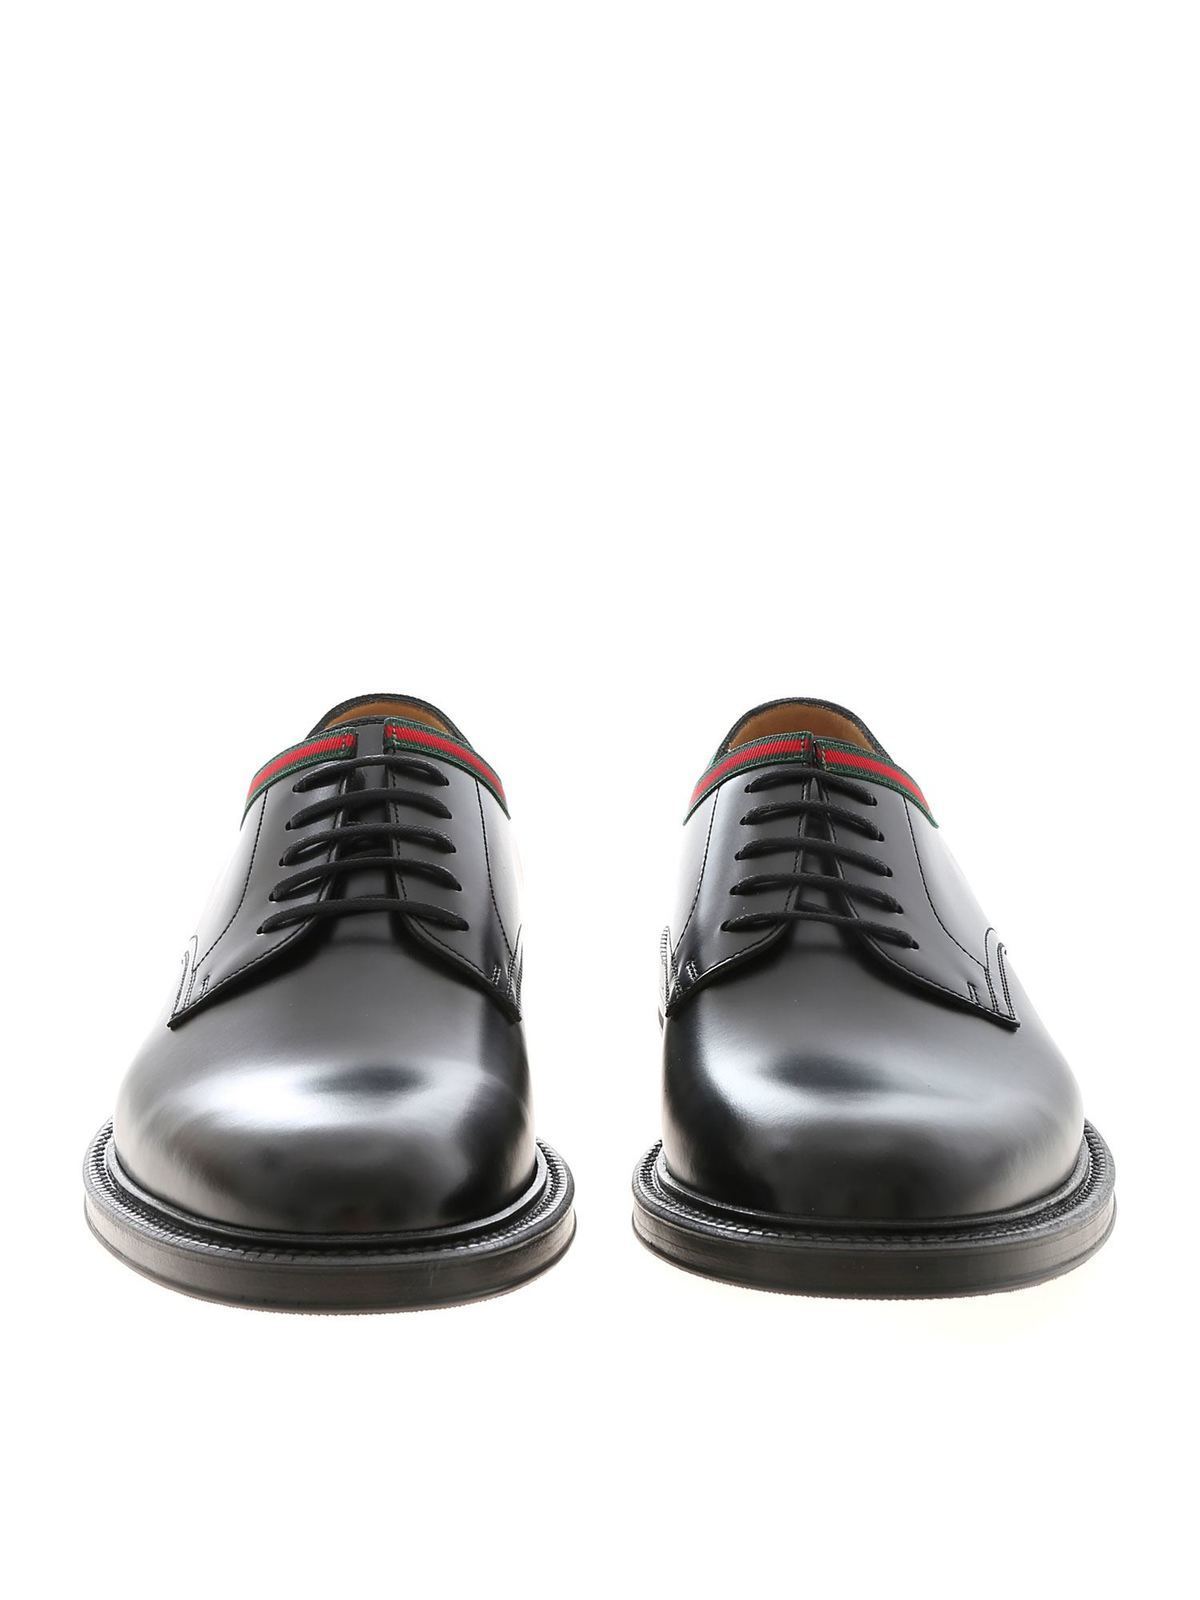 Lace-ups shoes Gucci - Web derby shoes in black - 472749AZM301060